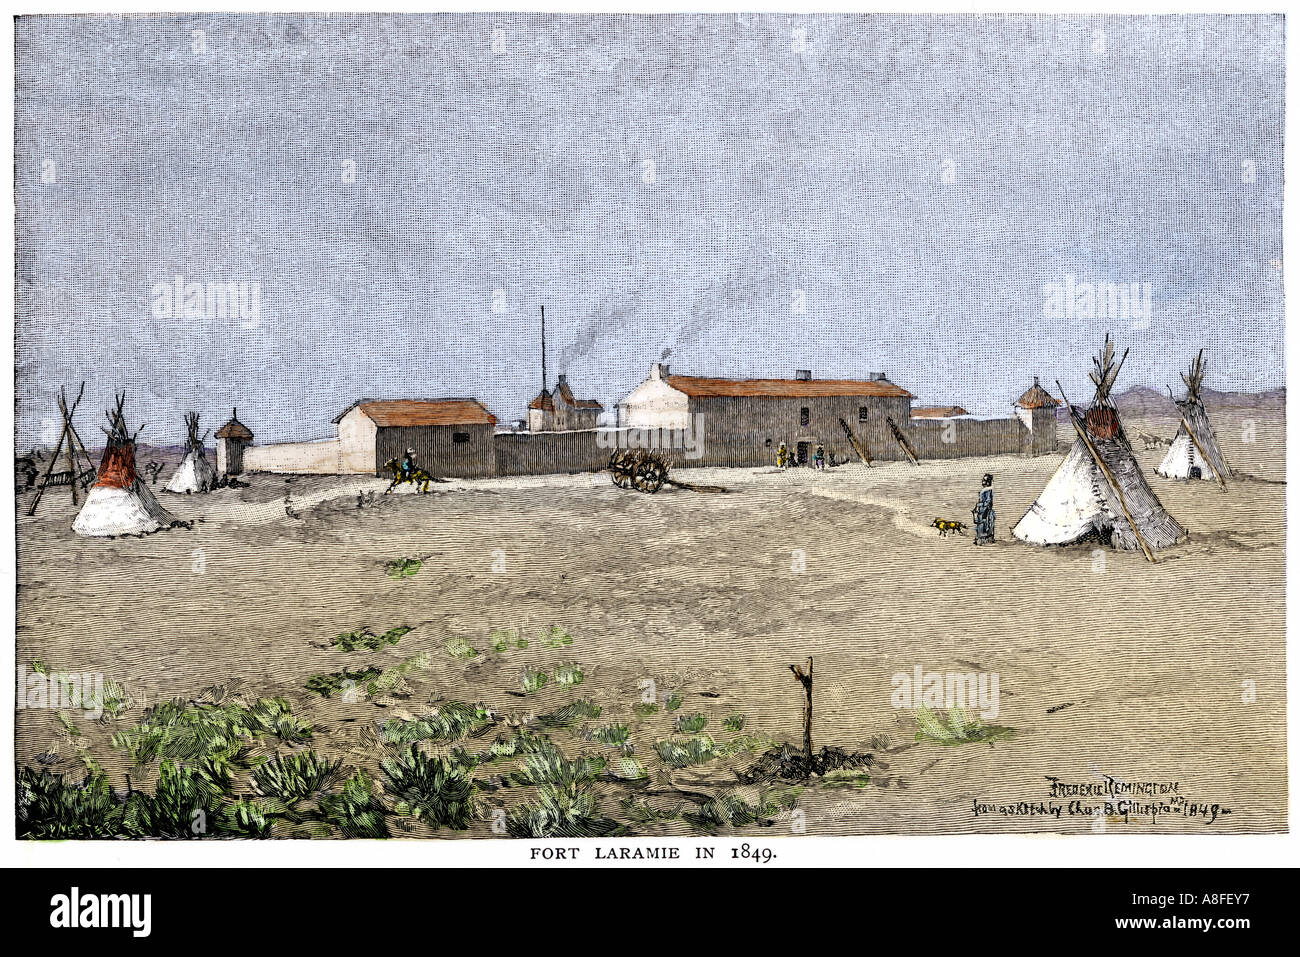 Fort Laramie Wyoming in 1849 a key landmark on the Oregon Trail and Mormon Trail. Hand-colored woodcut of a Frederic Remington illustration Stock Photo